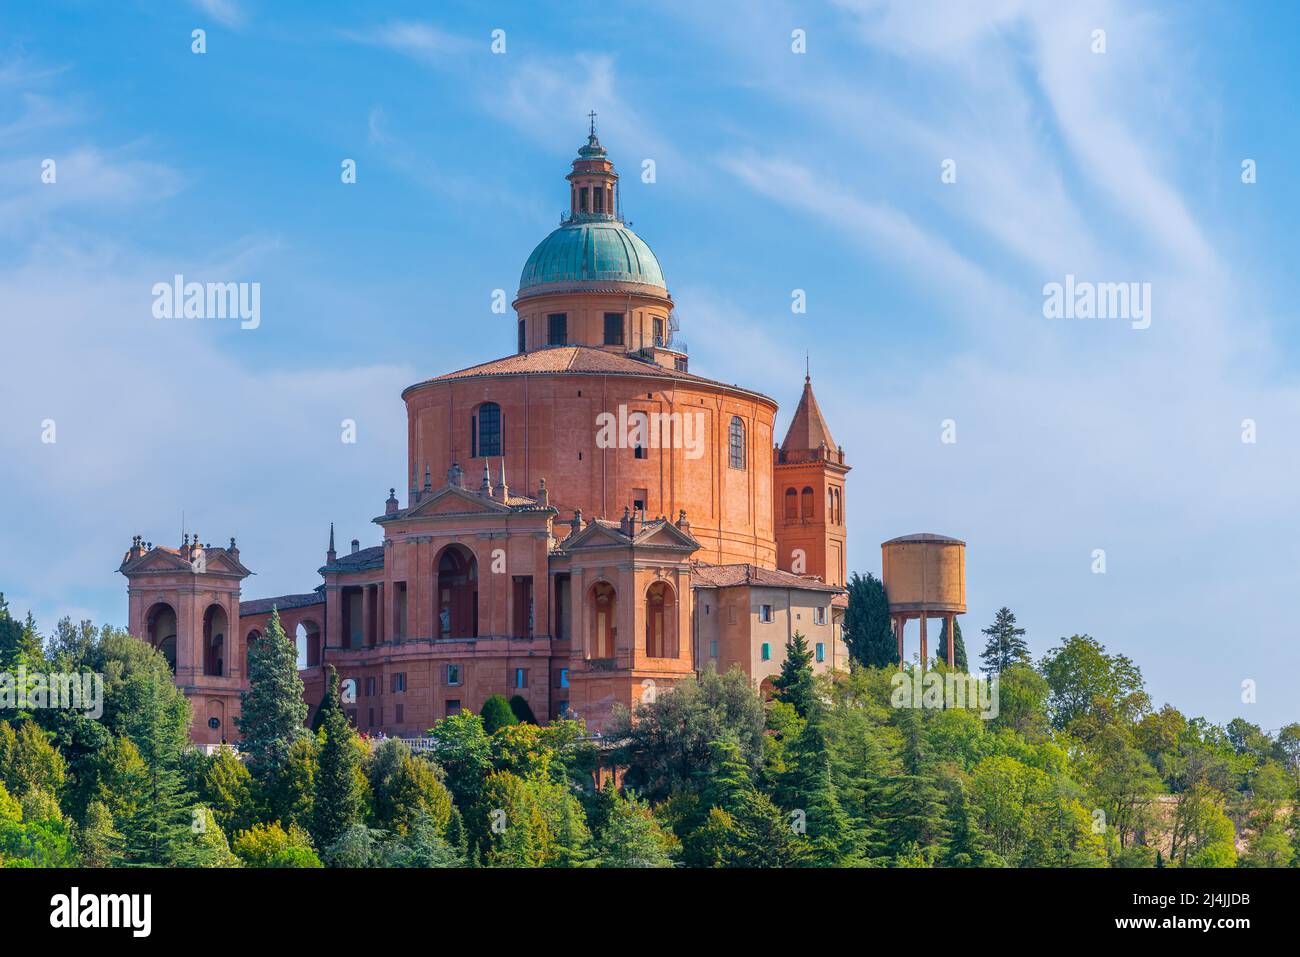 Aerial view of Sanctuary of the Madonna di San Luca in Bologna, Italy. Stock Photo